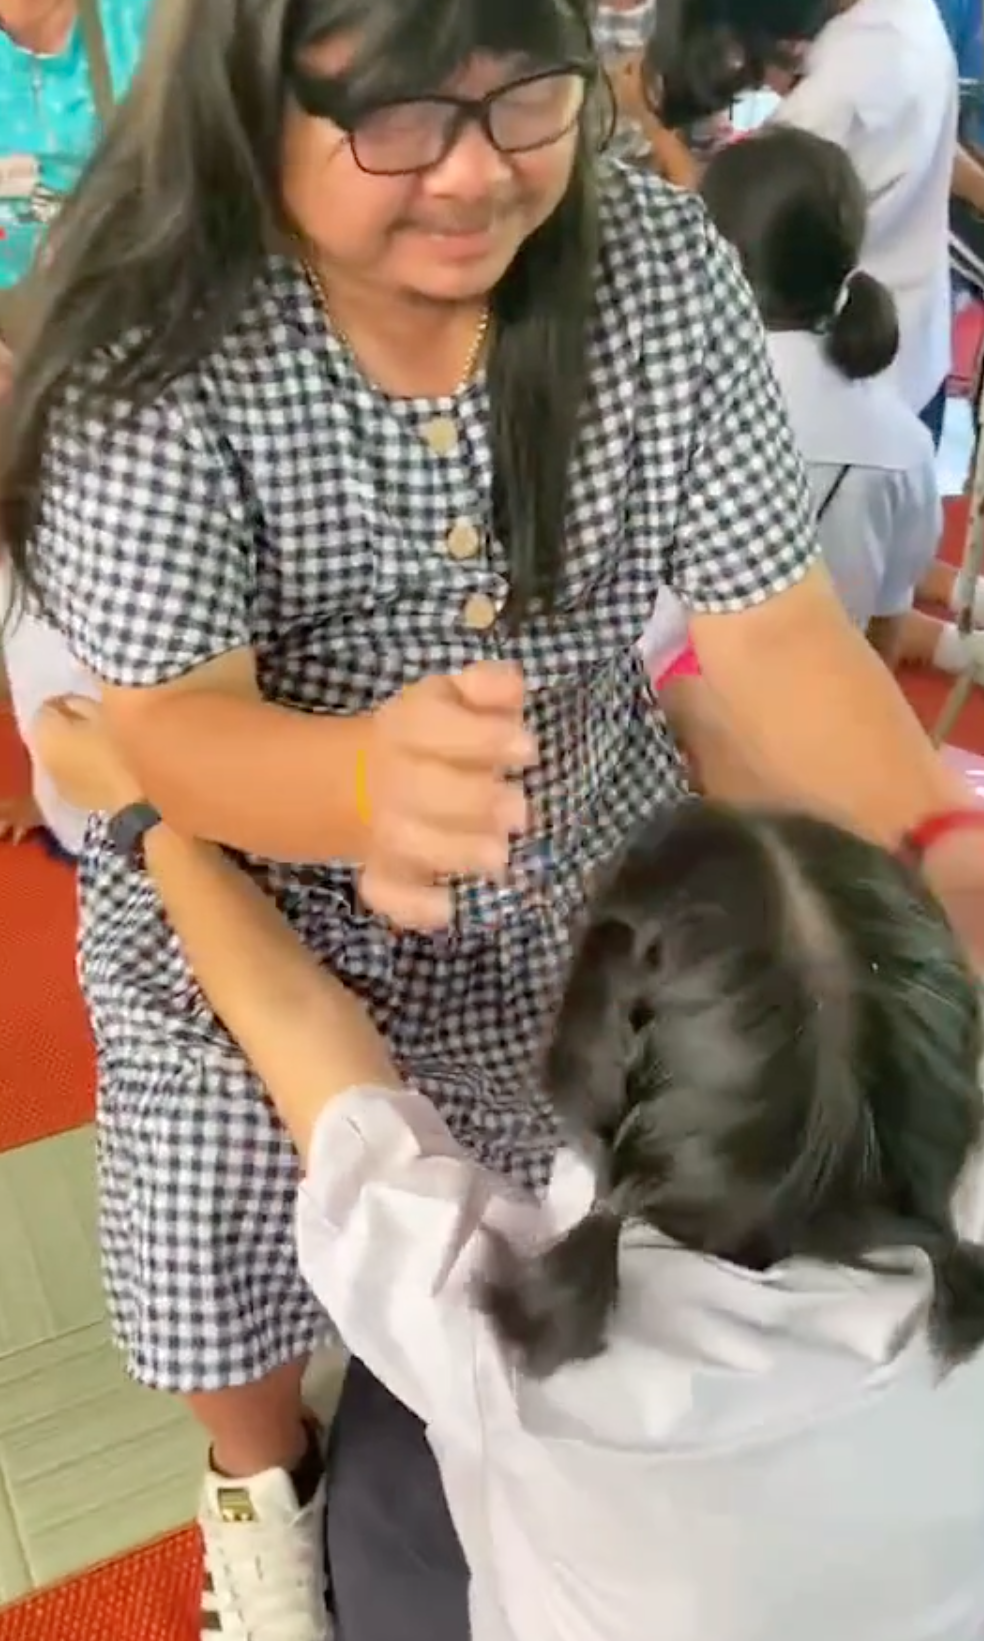 The dad lovingly fixed his daughter's hair. | Source: TikTok.com/joey_kp